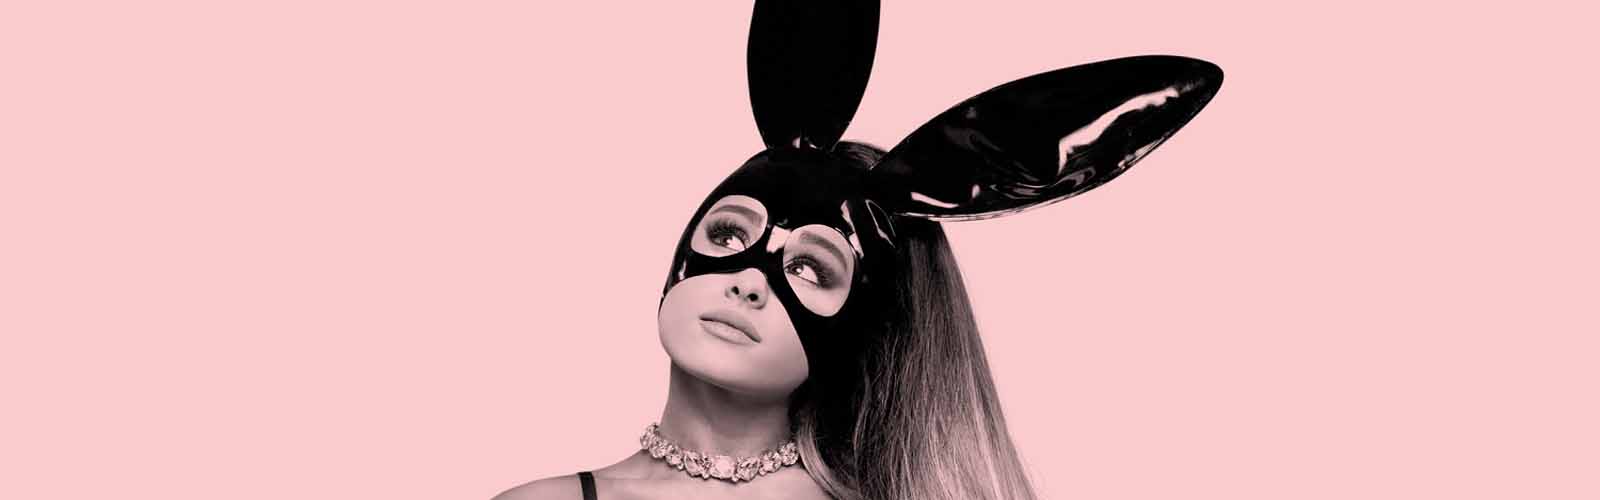 Ariana Grande cancels tour dates after Manchester attack